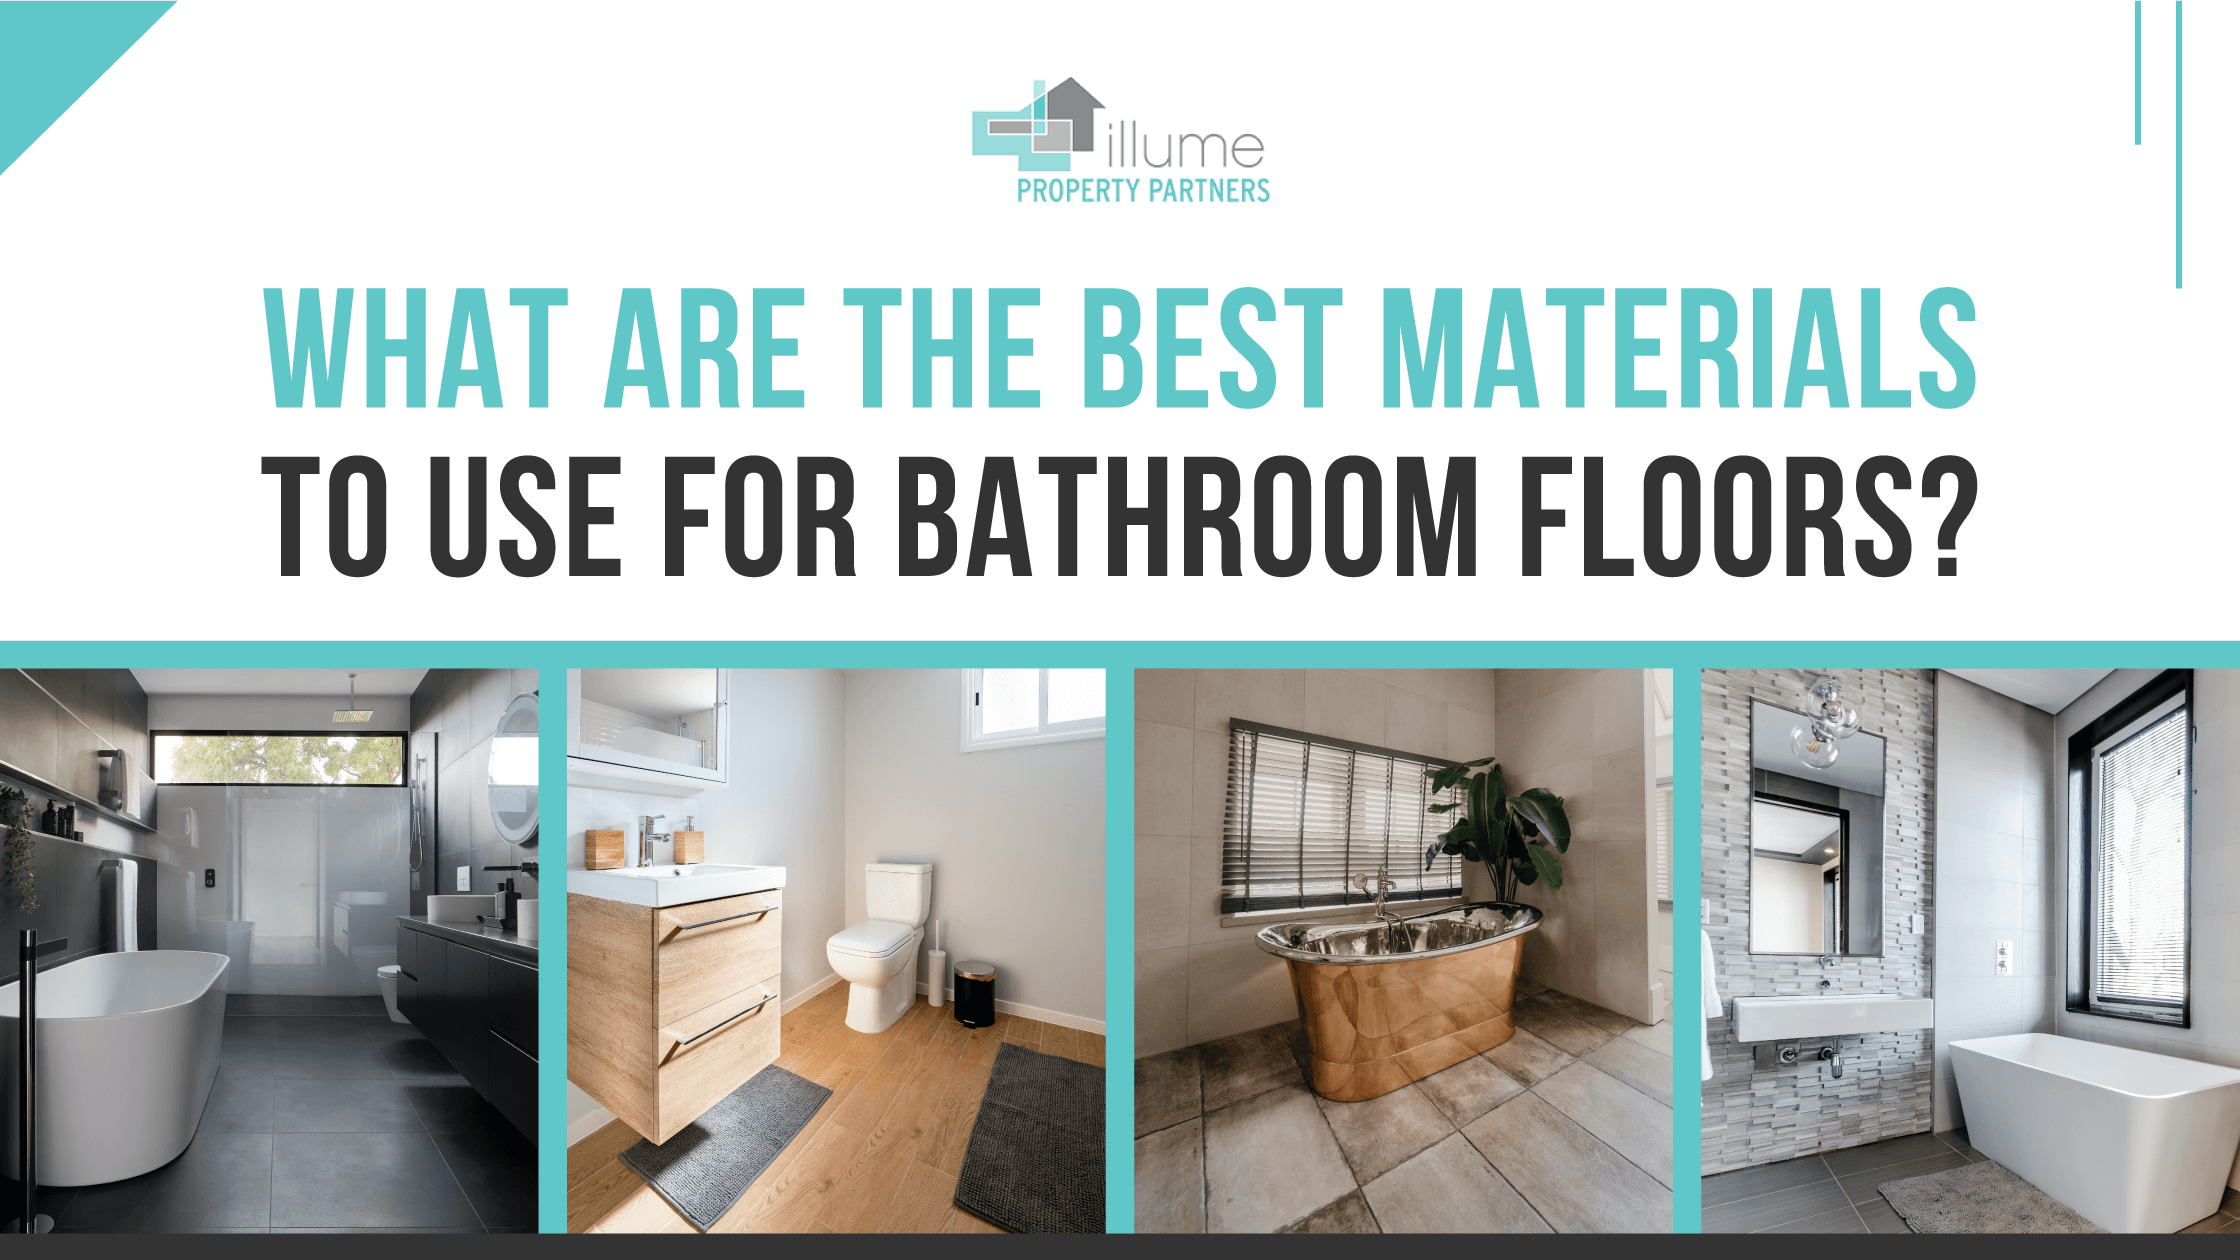 What Are the Best Materials to Use for Bathroom Floors?